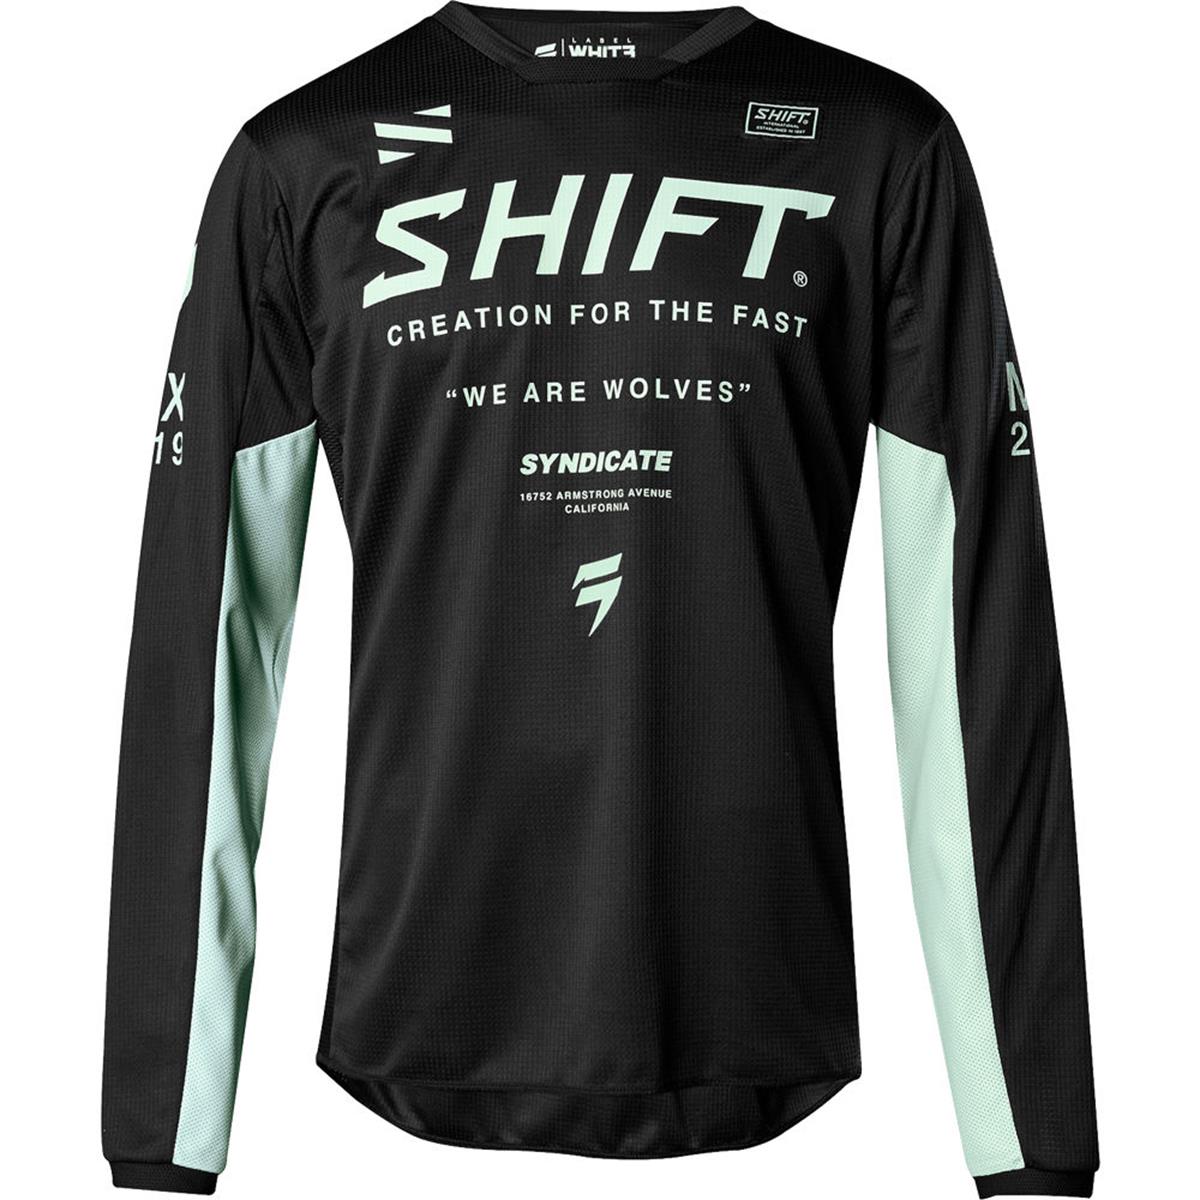 Shift Maillot MX Whit3 Label Iceland Black/Mint - Limited Edition